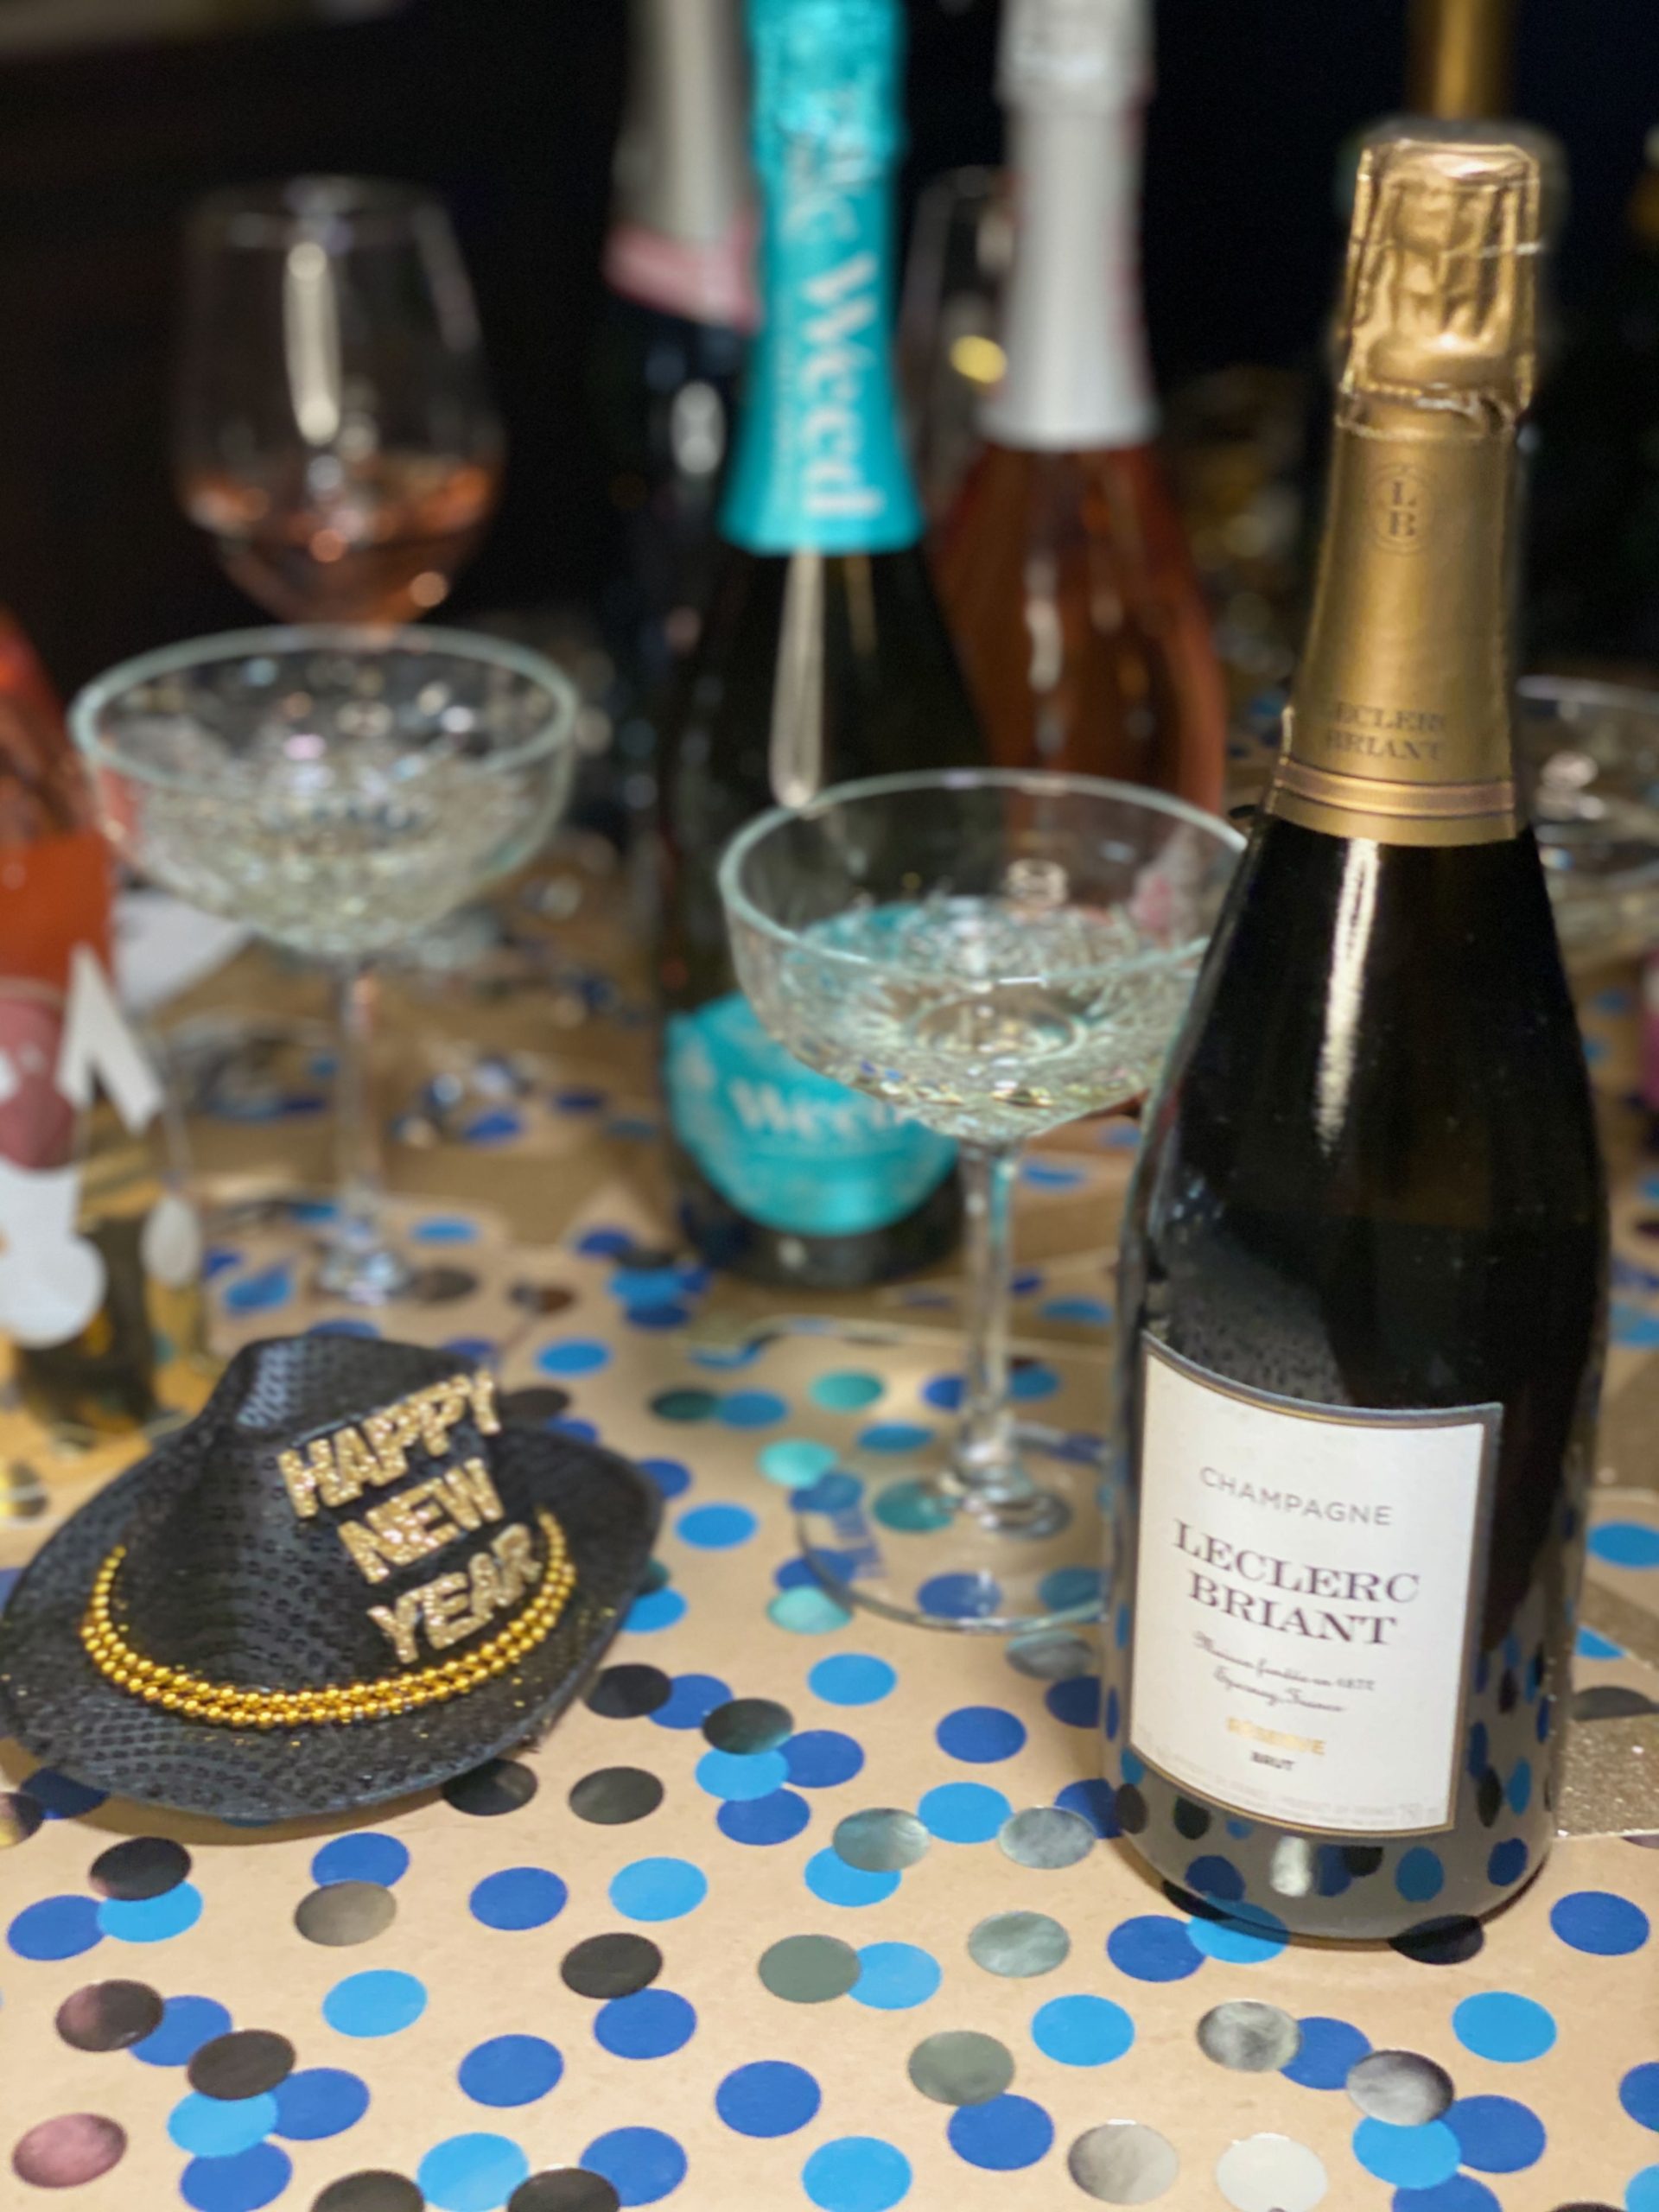 Leclerc Briant Brut Reserve Is the Best Bubbly For NYE